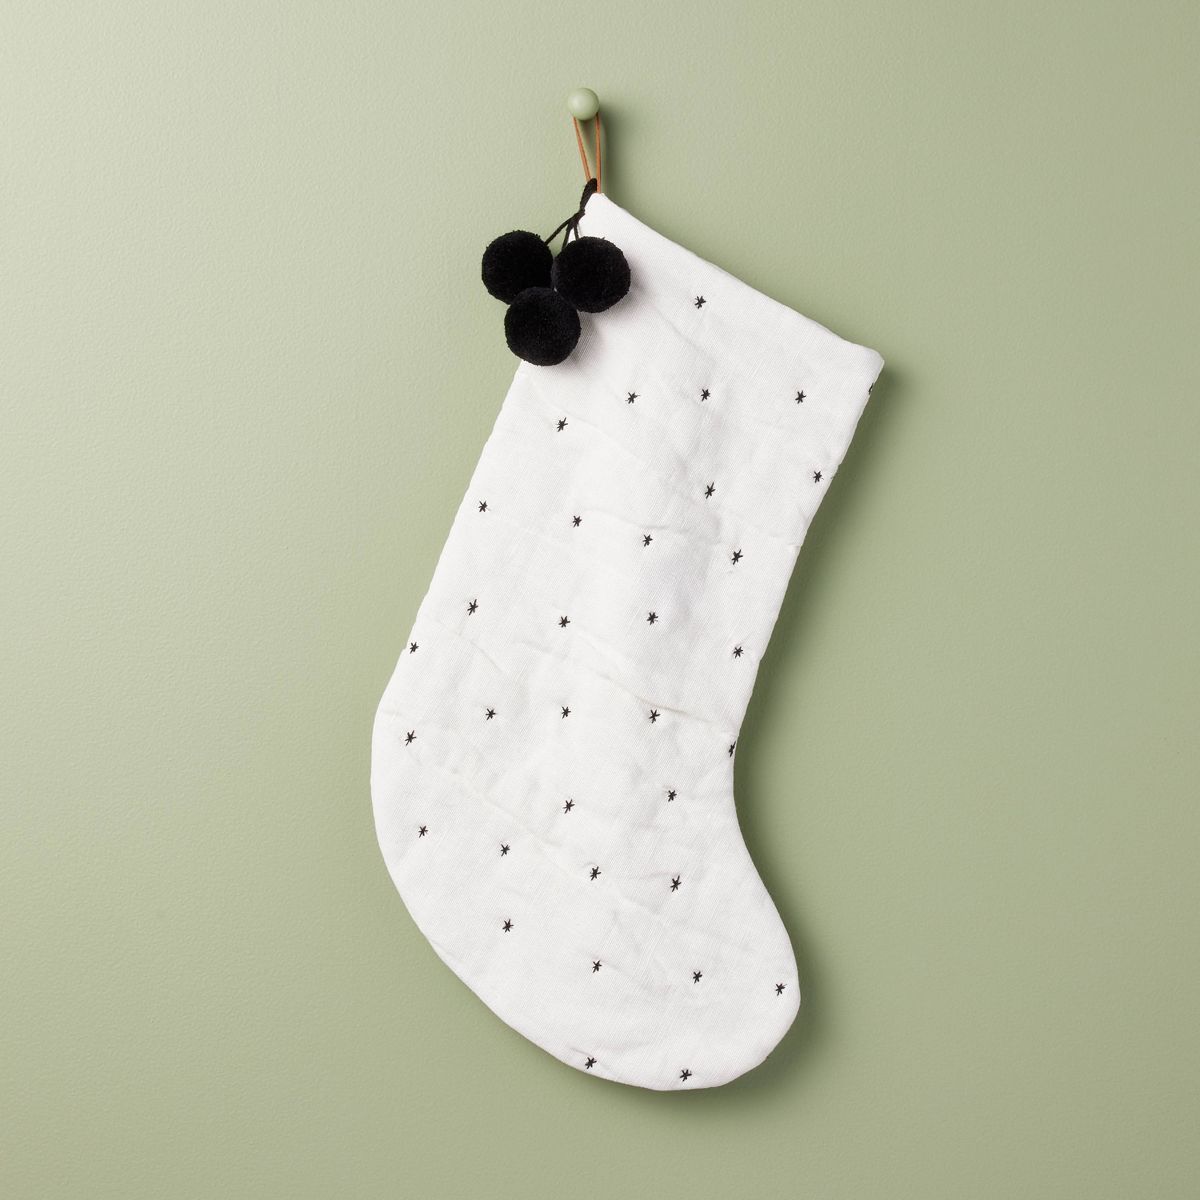 Embroidered Star Christmas Stocking Cream/Black - Hearth & Hand™ with Magnolia | Target